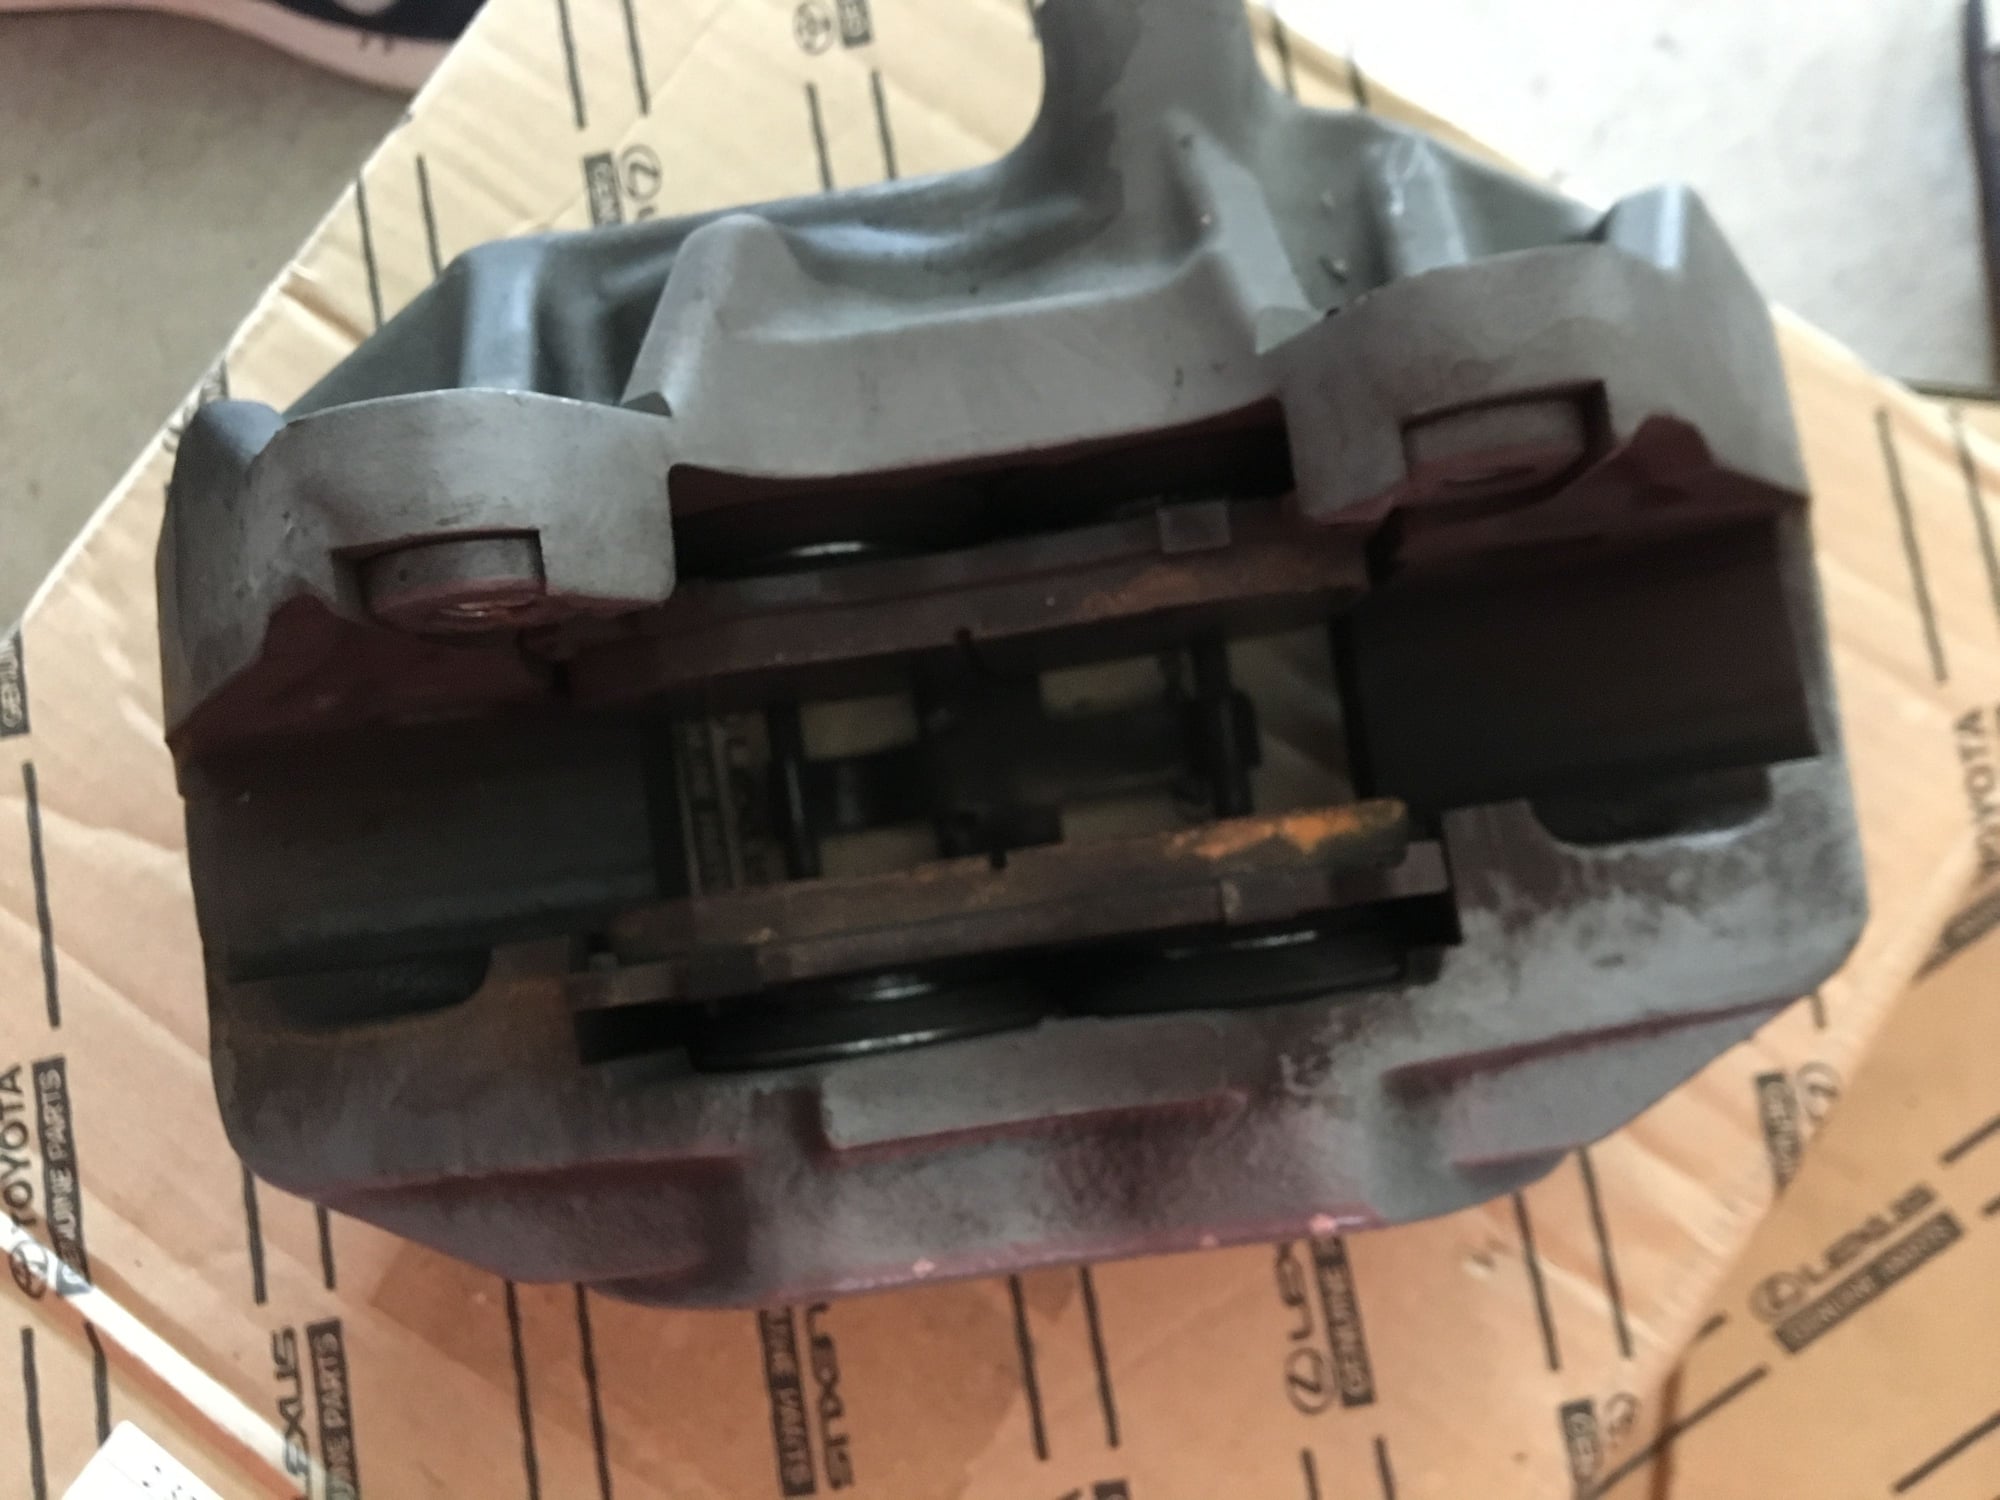 Brakes - Supra twin turbo brakes (front calipers, rotors, and pads) - Used - 1994 to 1998 Toyota Supra - Hercules, CA 94547, United States